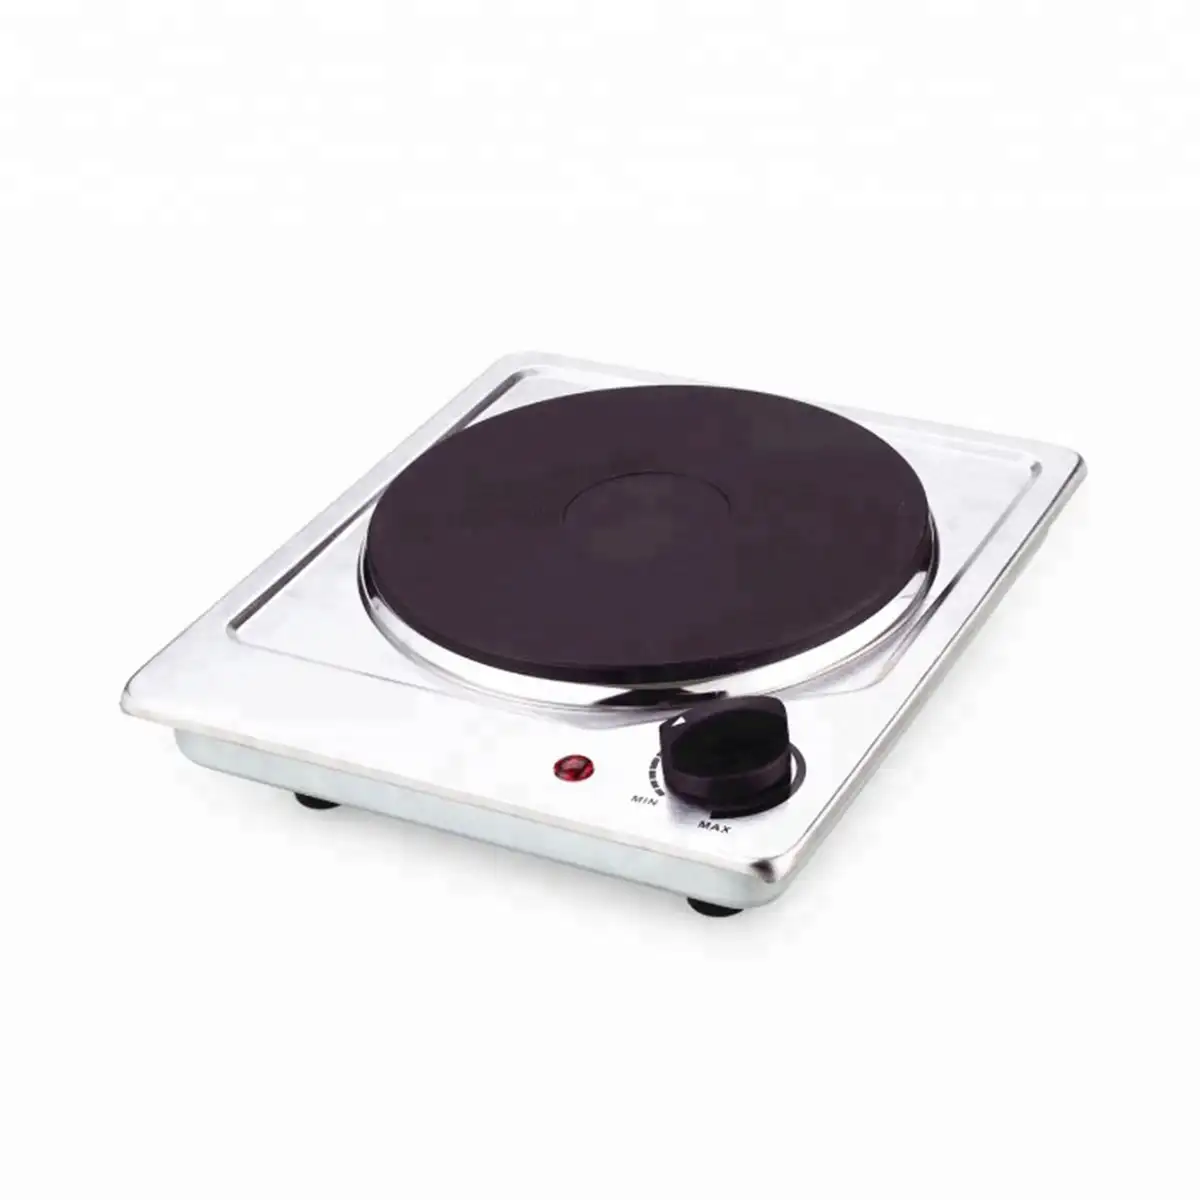 Powerful Electric Built-in Singer Solid Burner Hot Plate